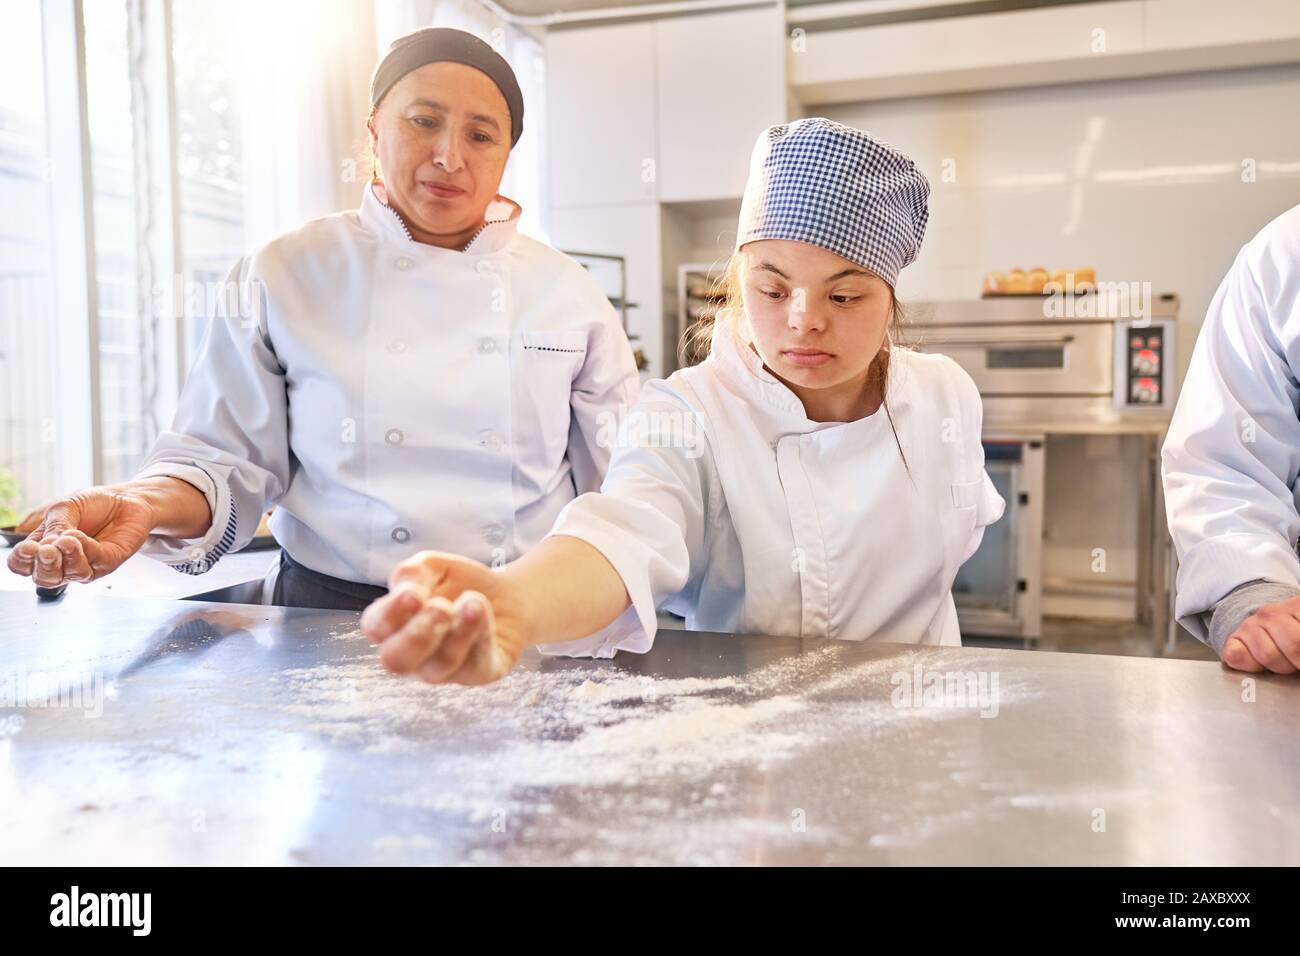 Young woman with Down Syndrome flouring surface in baking class Stock Photo